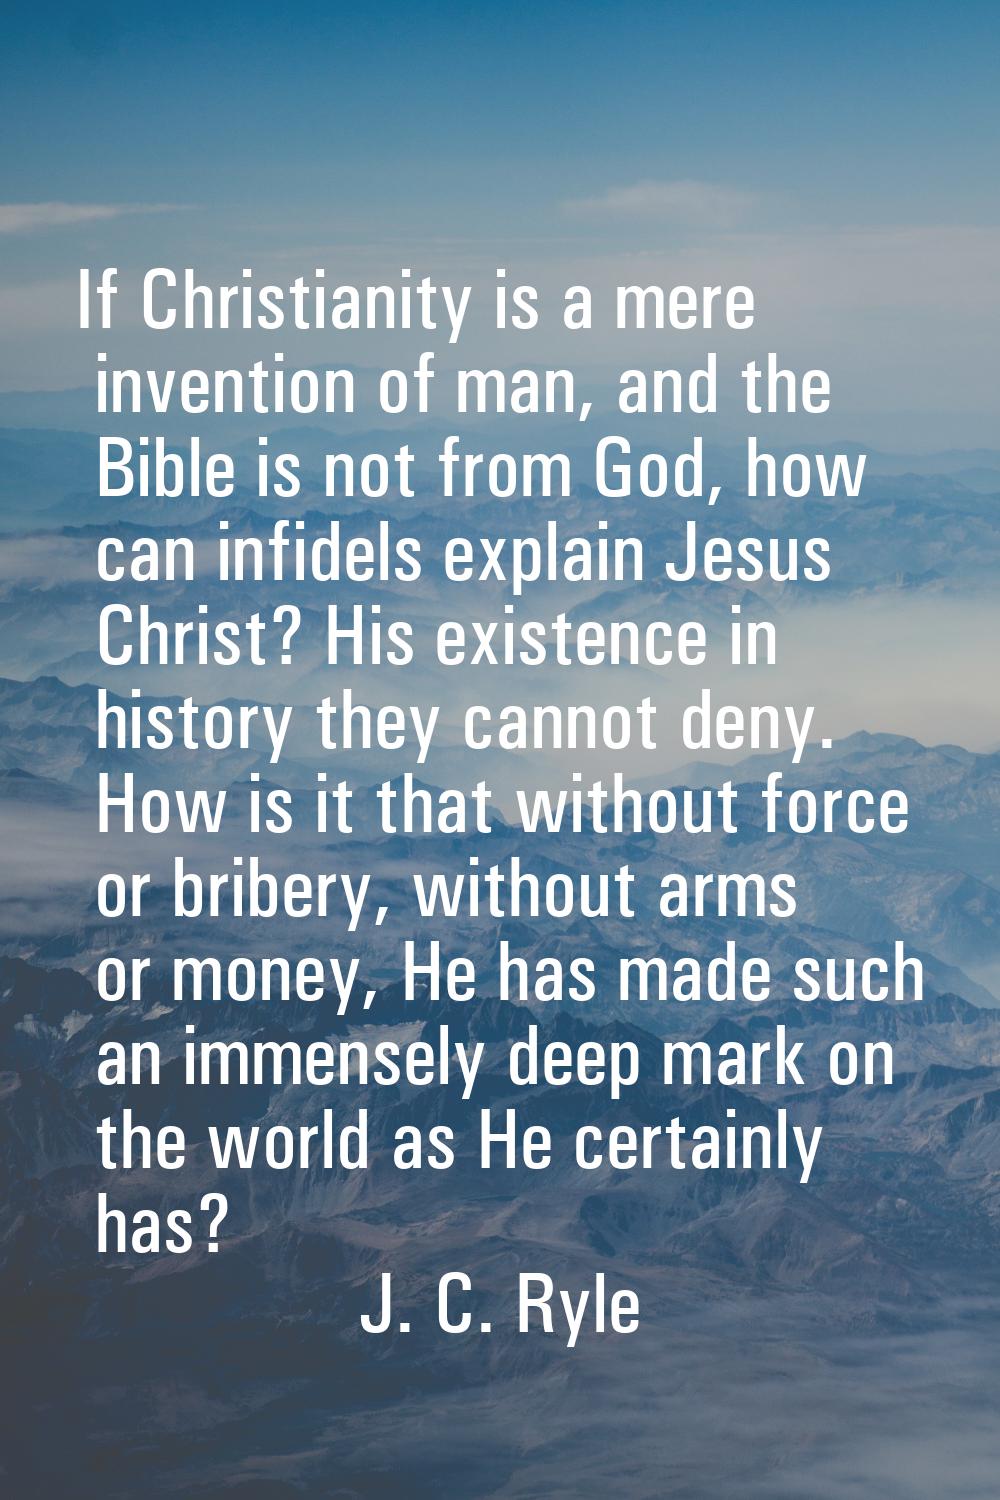 If Christianity is a mere invention of man, and the Bible is not from God, how can infidels explain